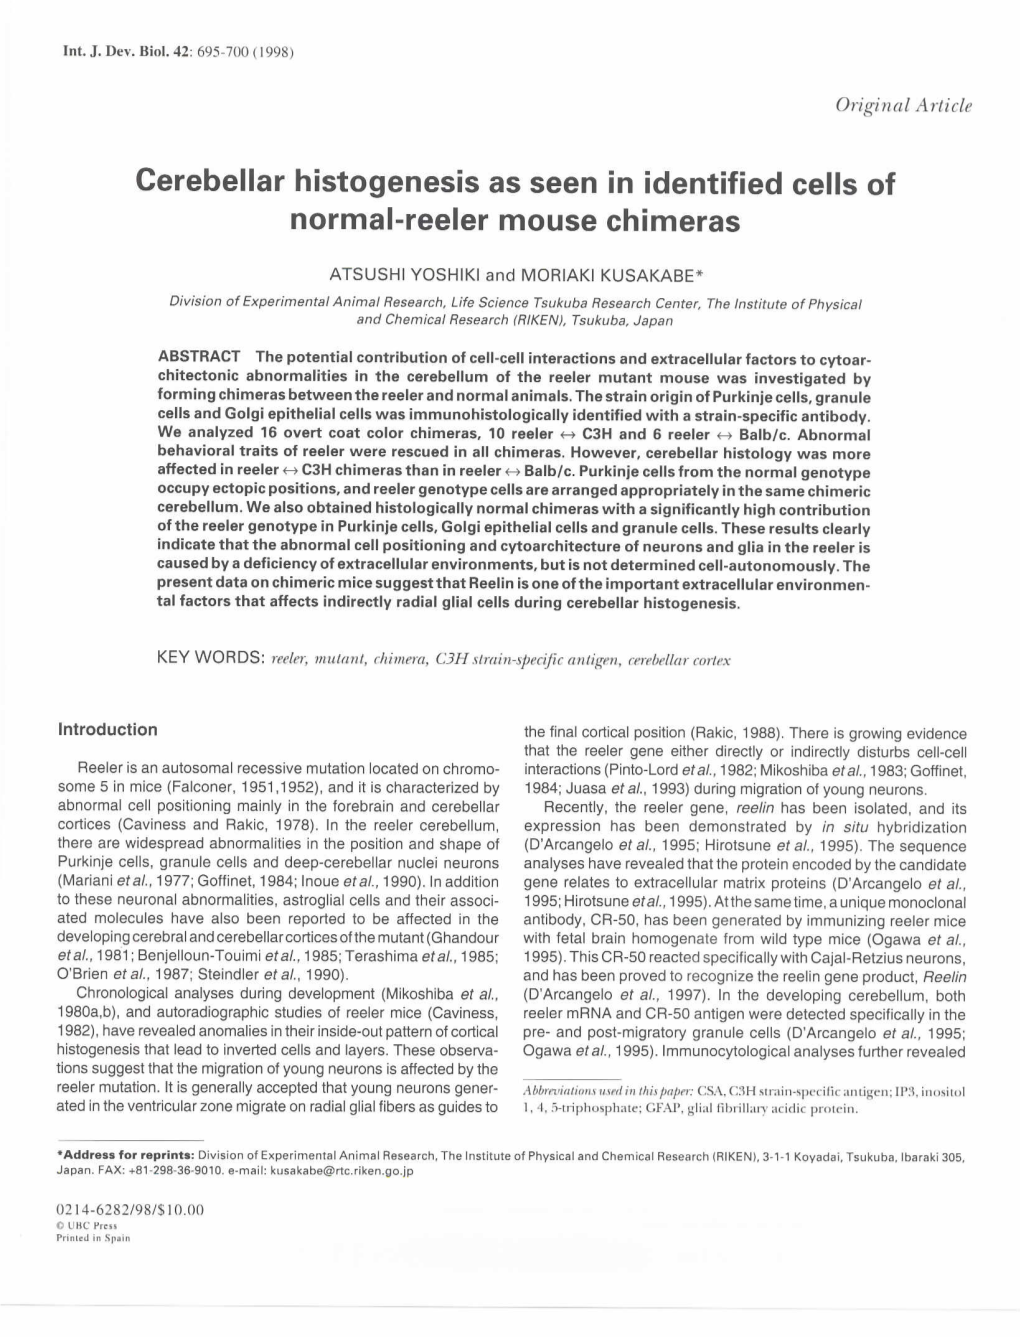 Cerebellar Histogenesis As Seen in Identified Cells of Normal-Reeler Mouse Chimeras